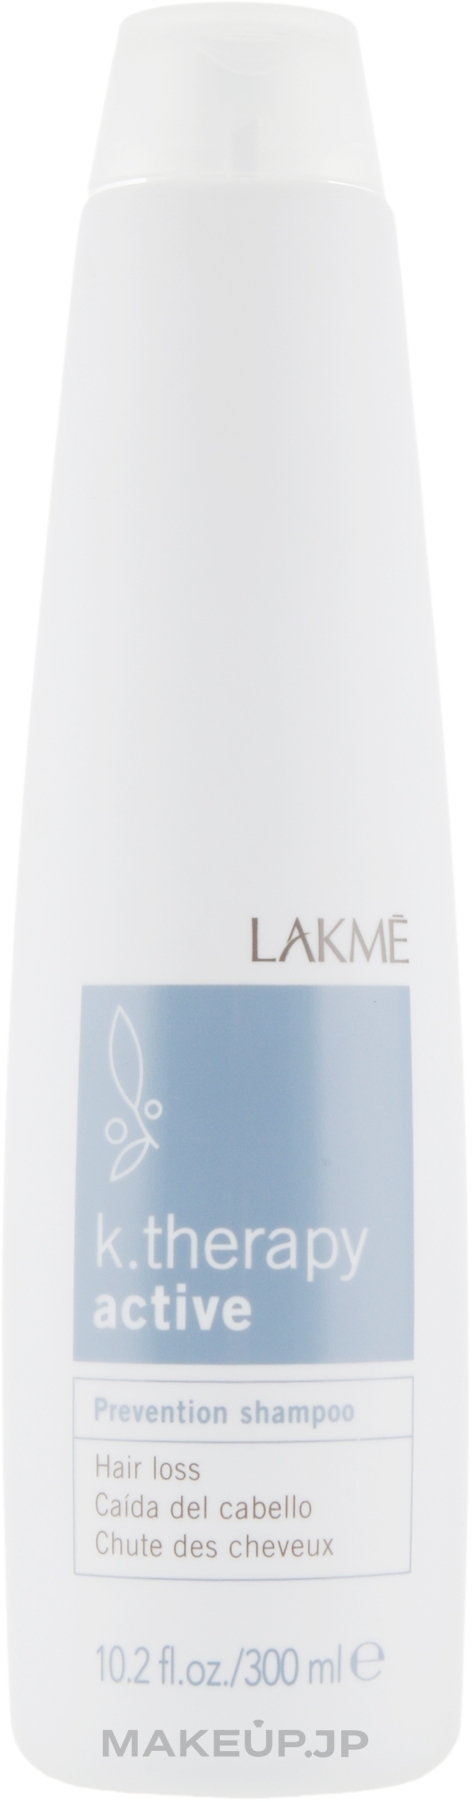 Active Hair Loss Prevention Therapy Shampoo - Lakme K.Therapy Active Prevention Shampoo — photo 300 ml